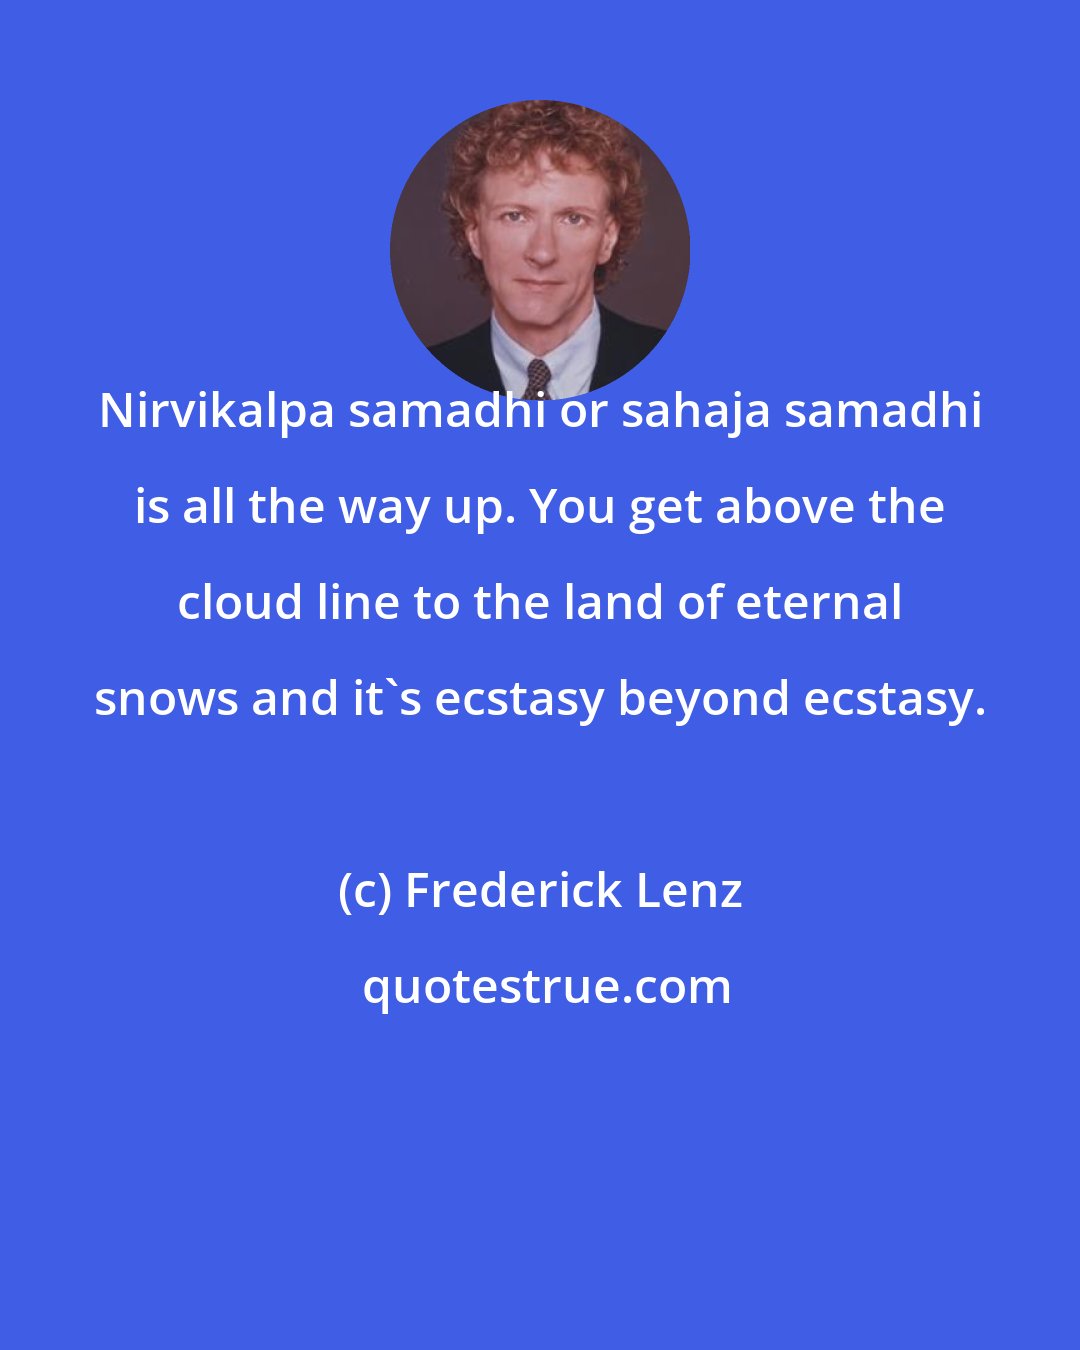 Frederick Lenz: Nirvikalpa samadhi or sahaja samadhi is all the way up. You get above the cloud line to the land of eternal snows and it's ecstasy beyond ecstasy.